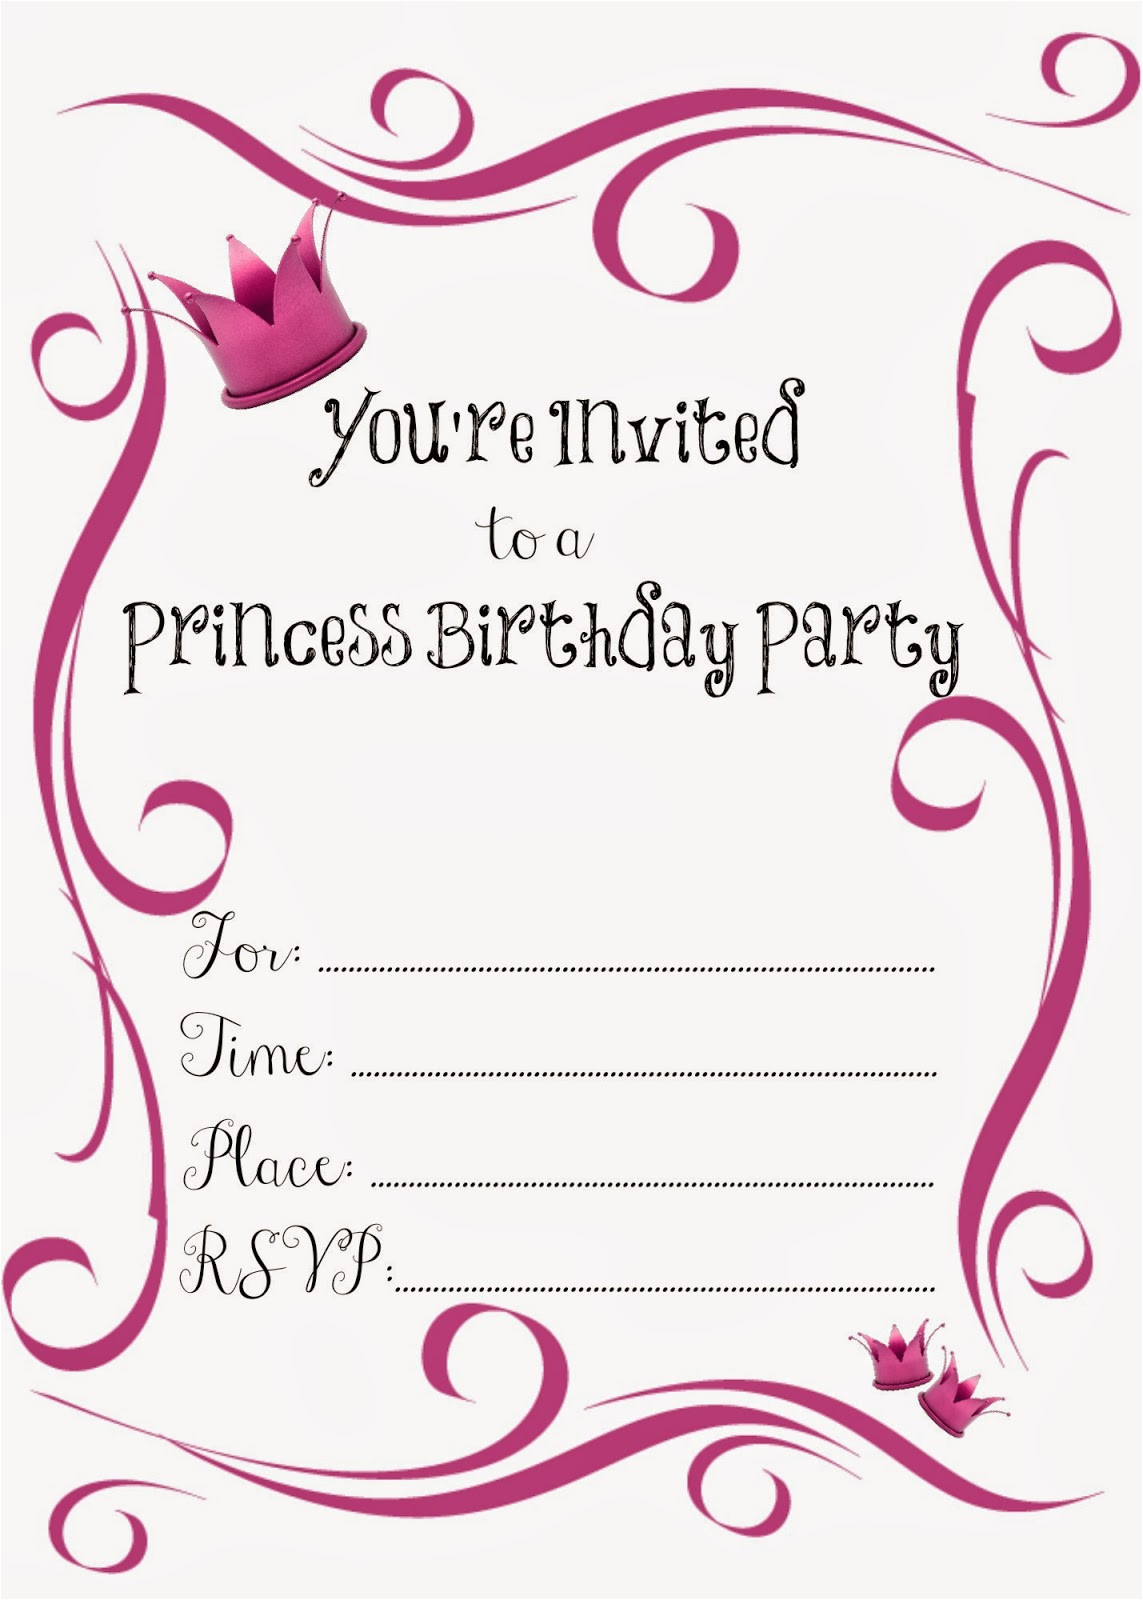 Party Invitation Template Girl Free Birthday Party Invitations for Girl Free Printable